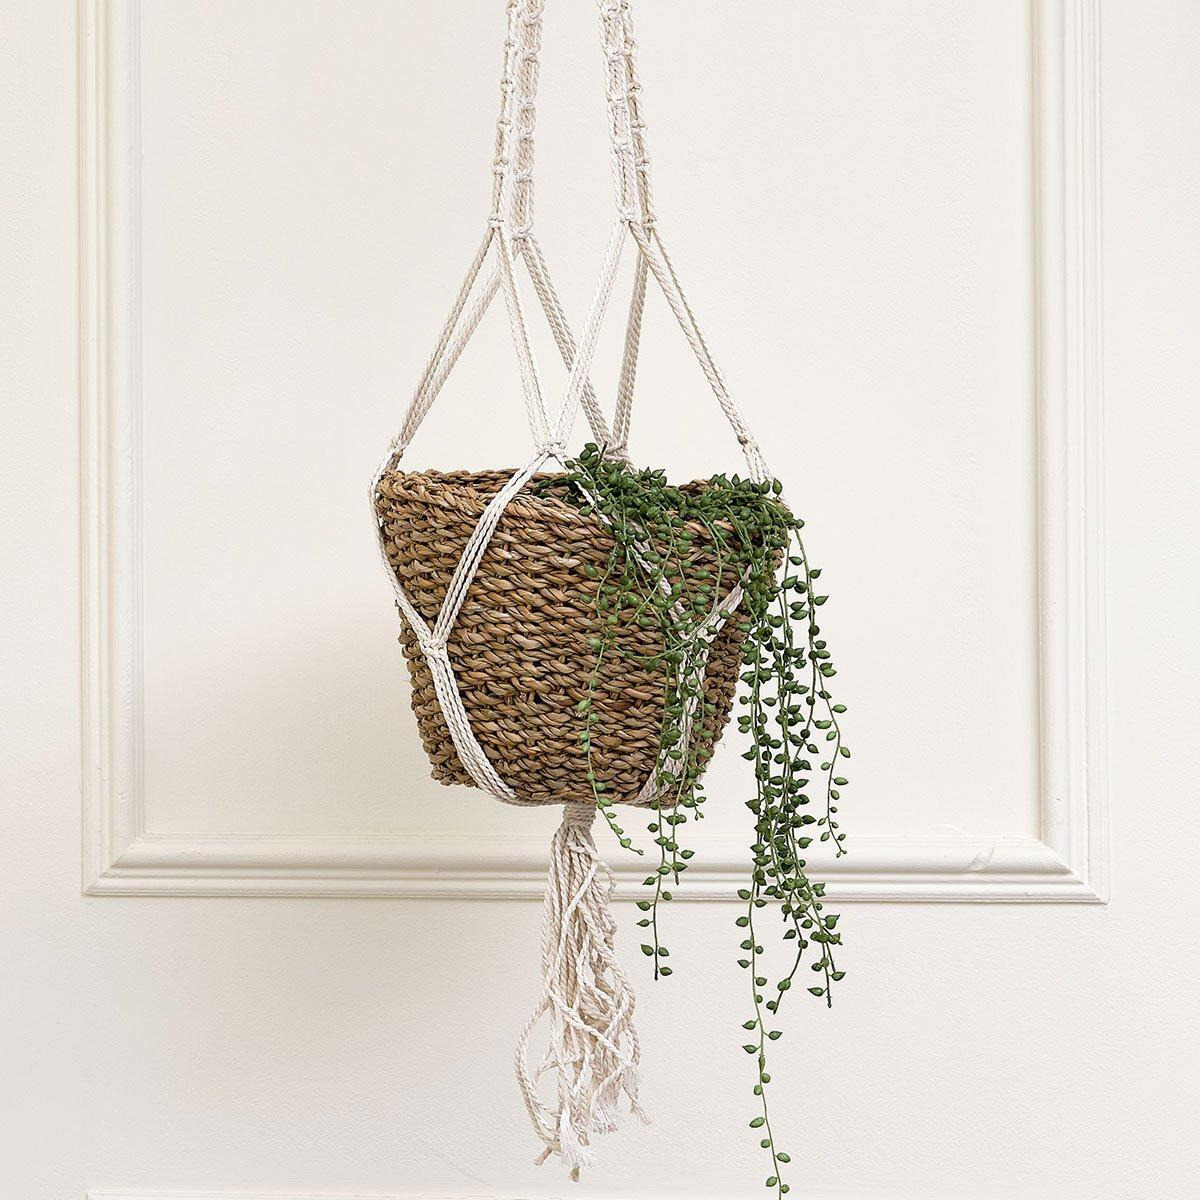 Woven Seagrass Hanging Planter - image 1